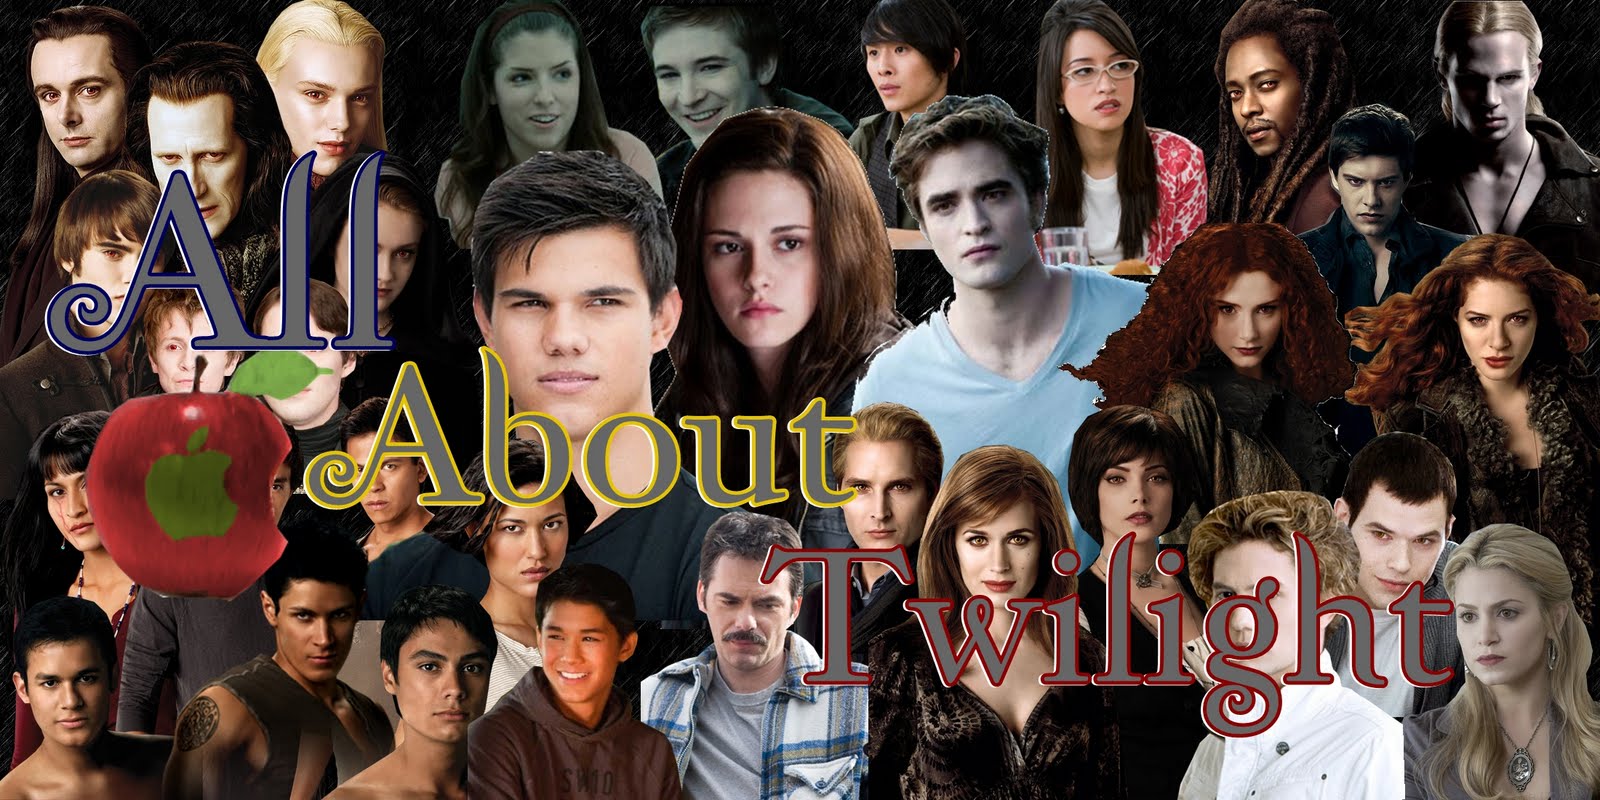 ALL ABOUT TWILIGHT